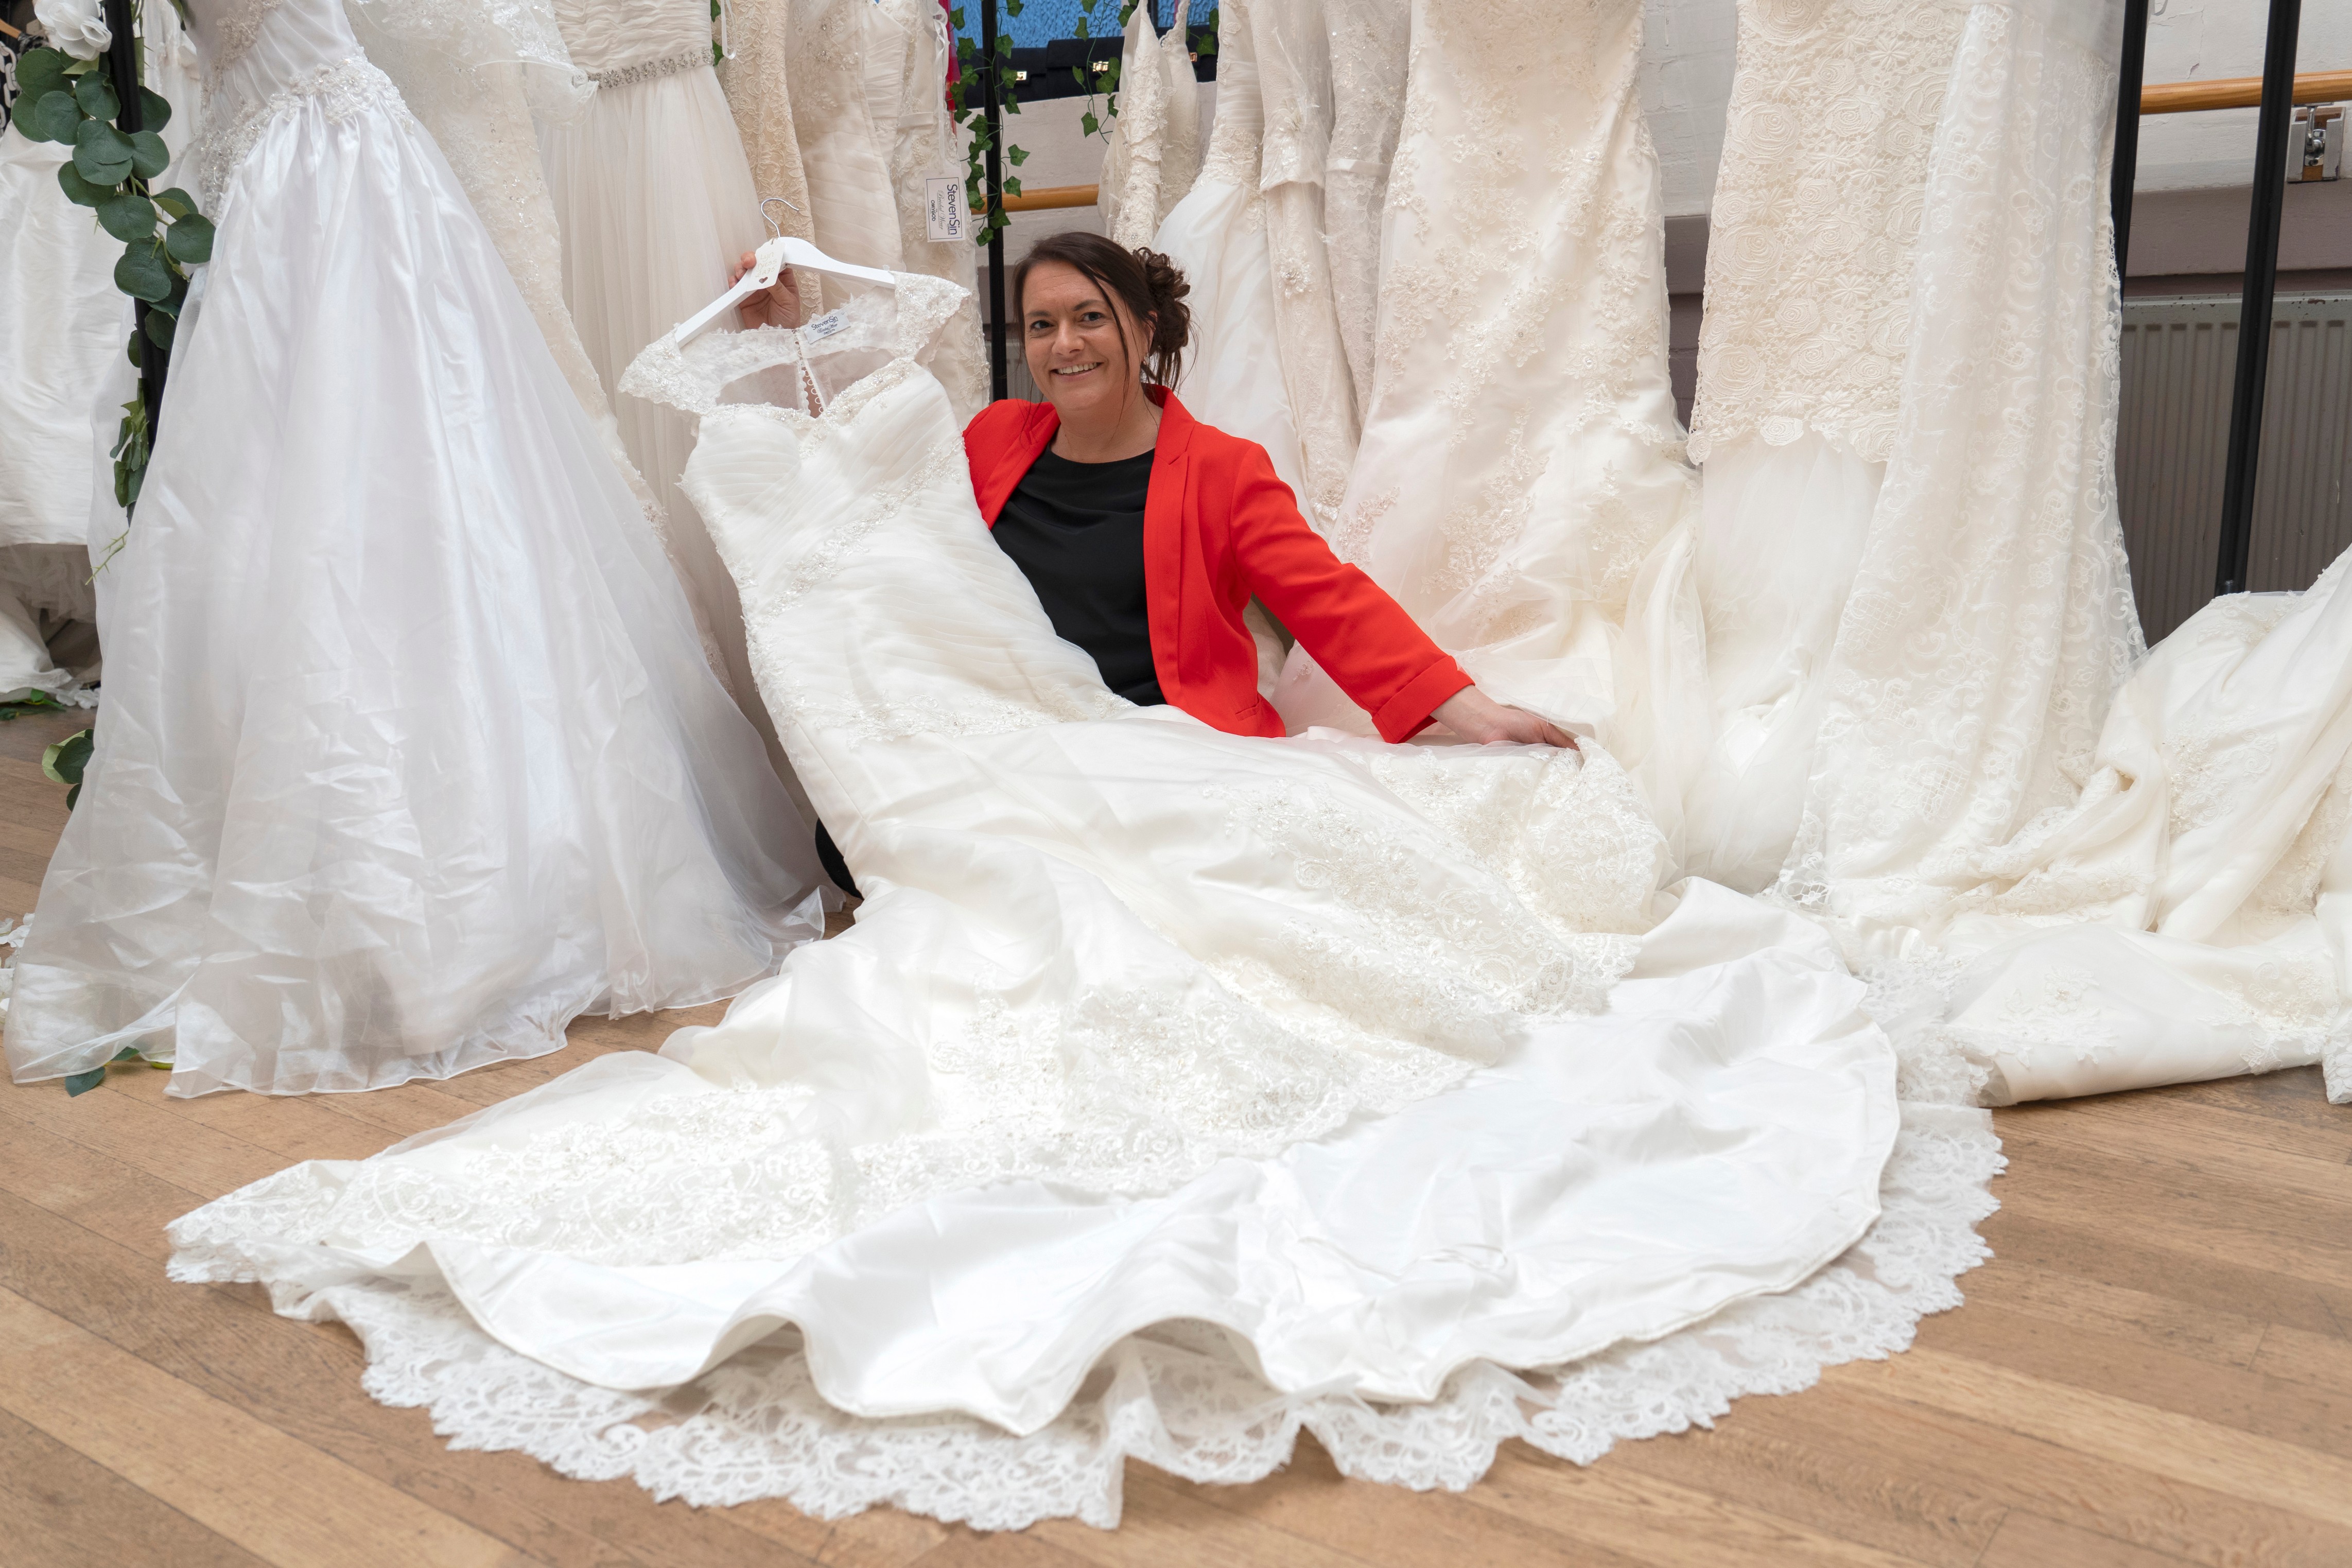 A photo of Sally Todd, the BHF shop manager, holding up one of the wedding dresses